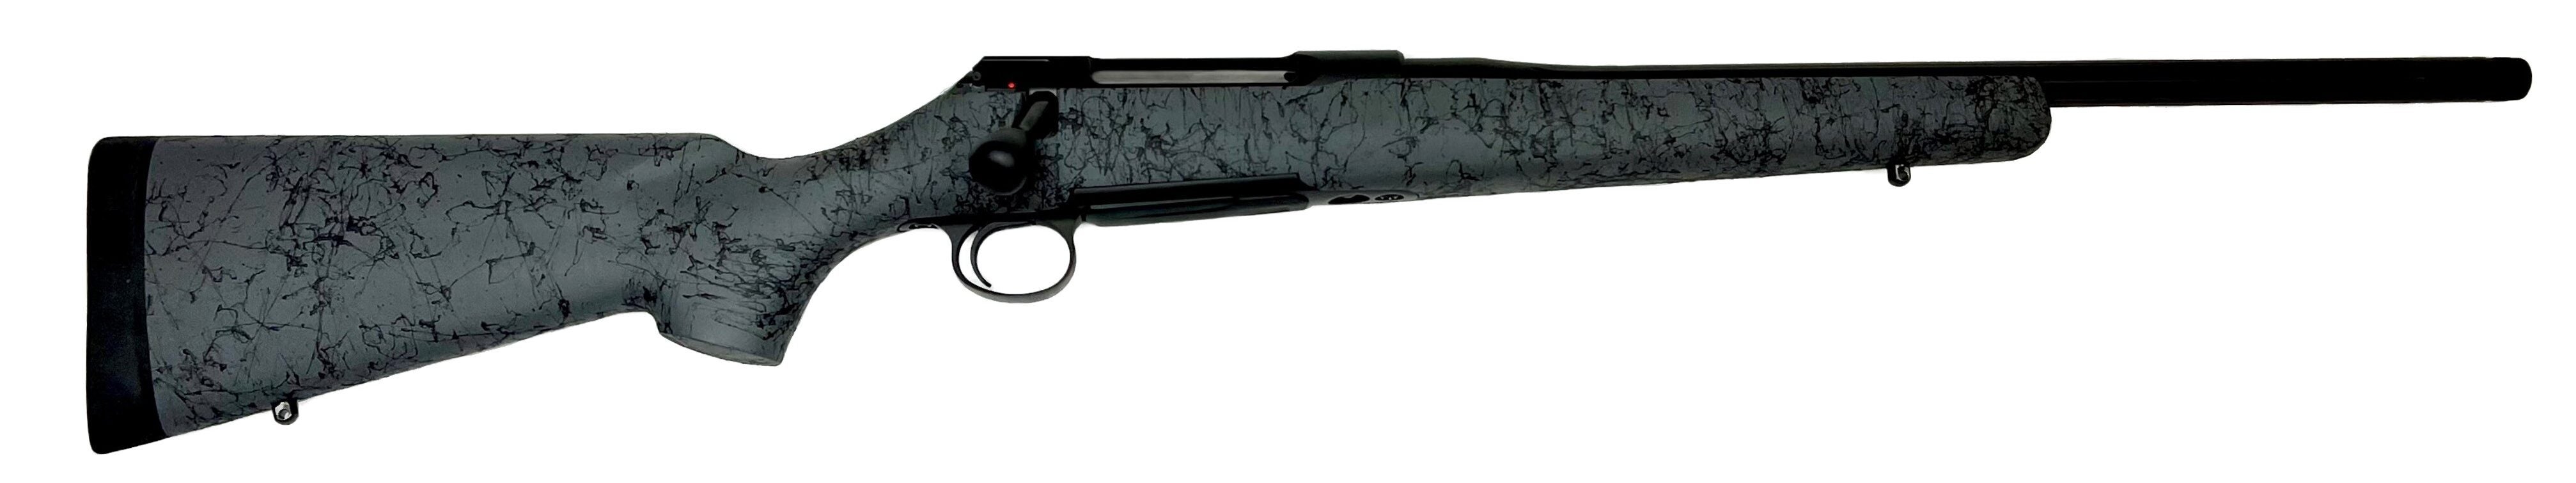 New SAUER 100 Rifles Featuring H-S Precision Stocks